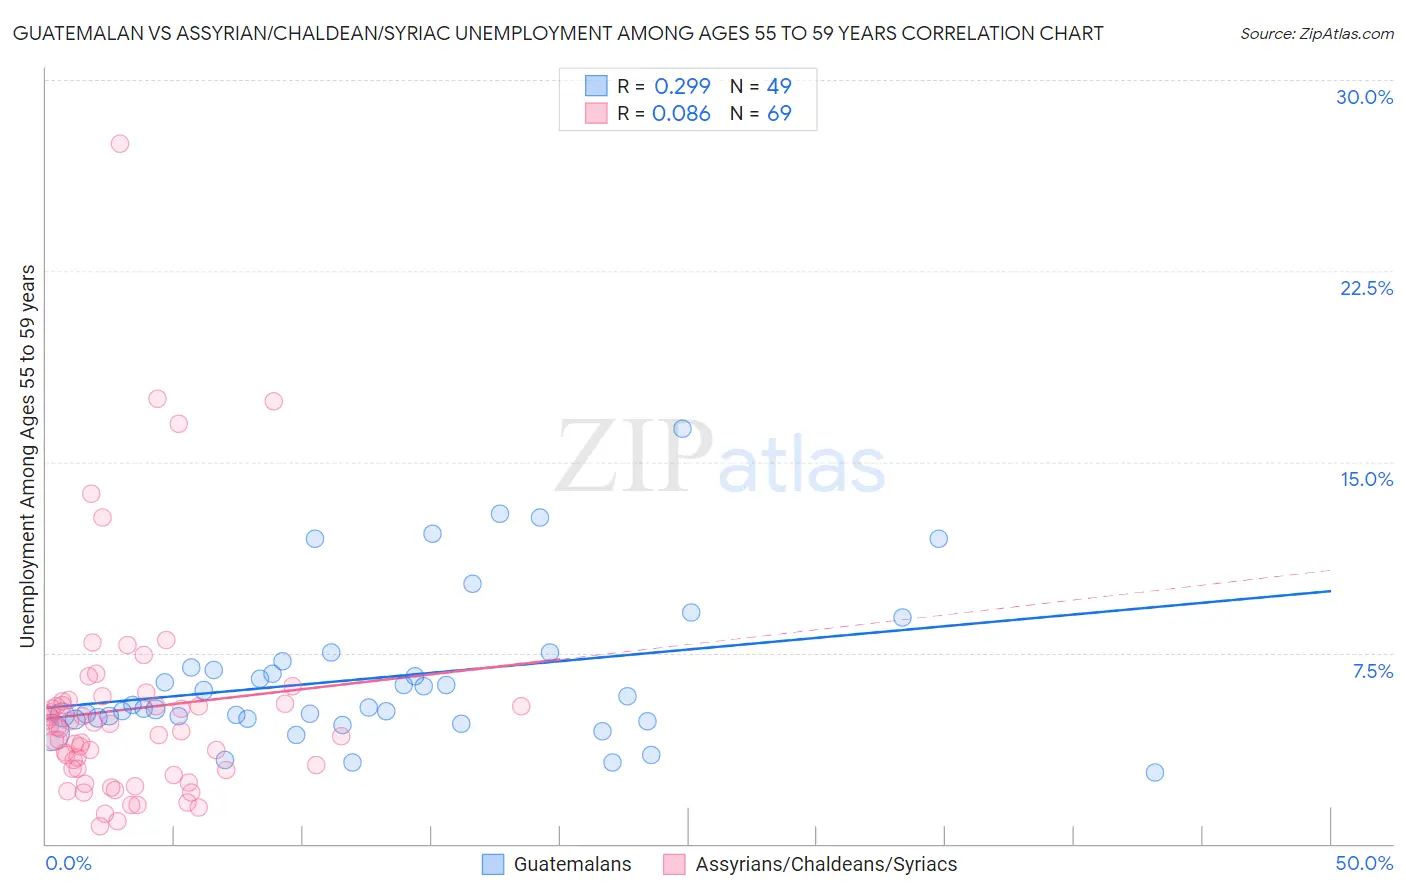 Guatemalan vs Assyrian/Chaldean/Syriac Unemployment Among Ages 55 to 59 years